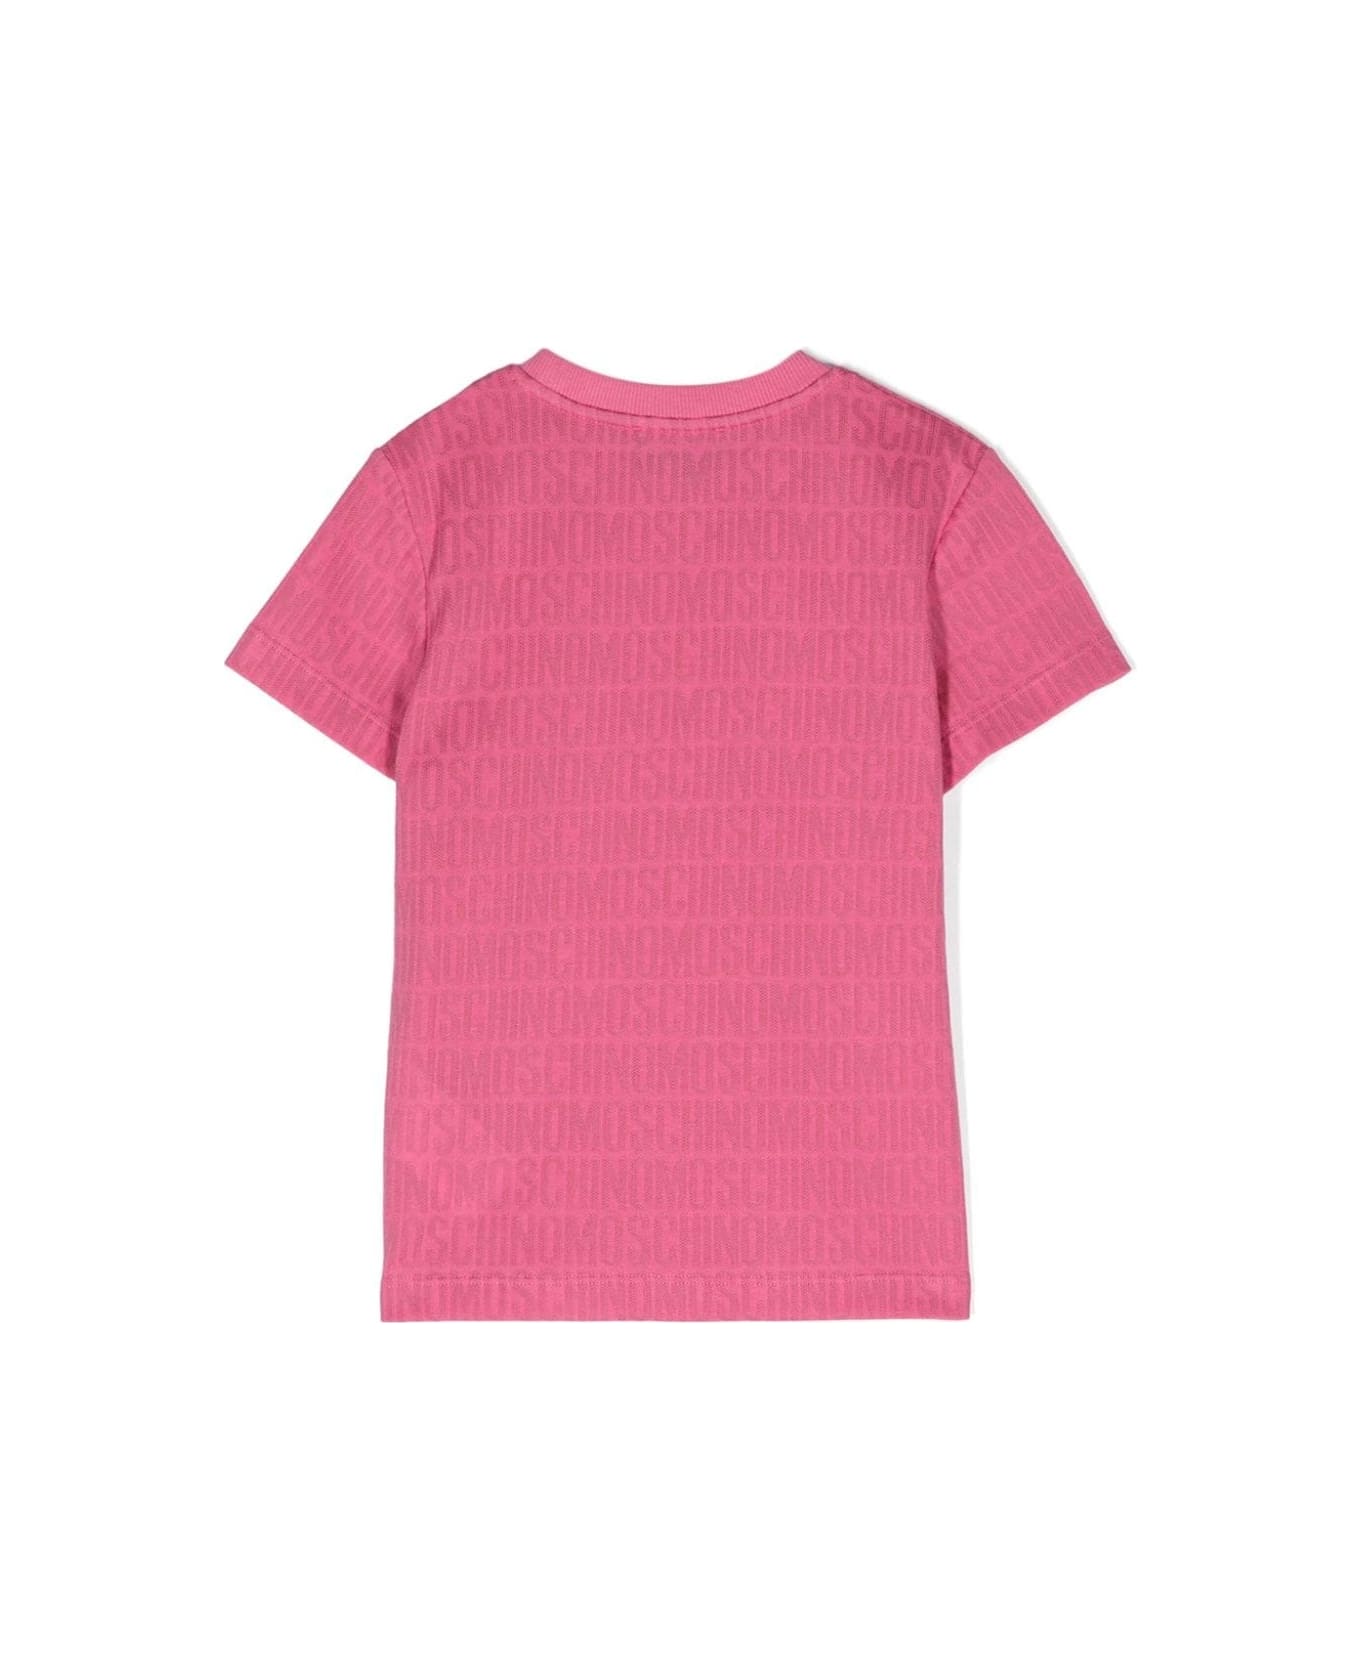 Moschino Pink T-shirt With All-over Logo - Pink